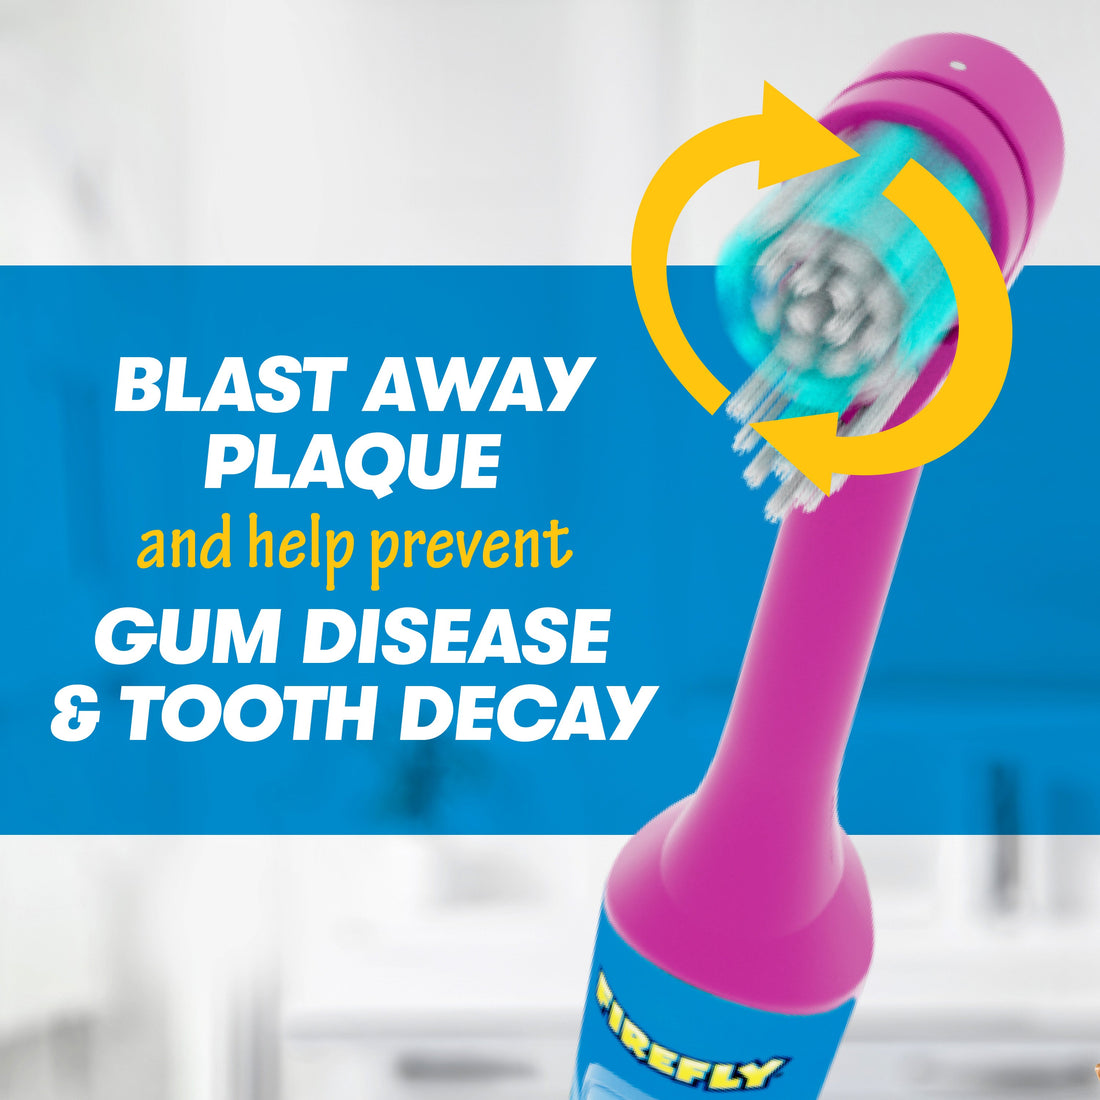 Firefly Clean and Protect toothbrush with a rotating head. Blast Away Plaque and help prevent gum disease and tooth decay